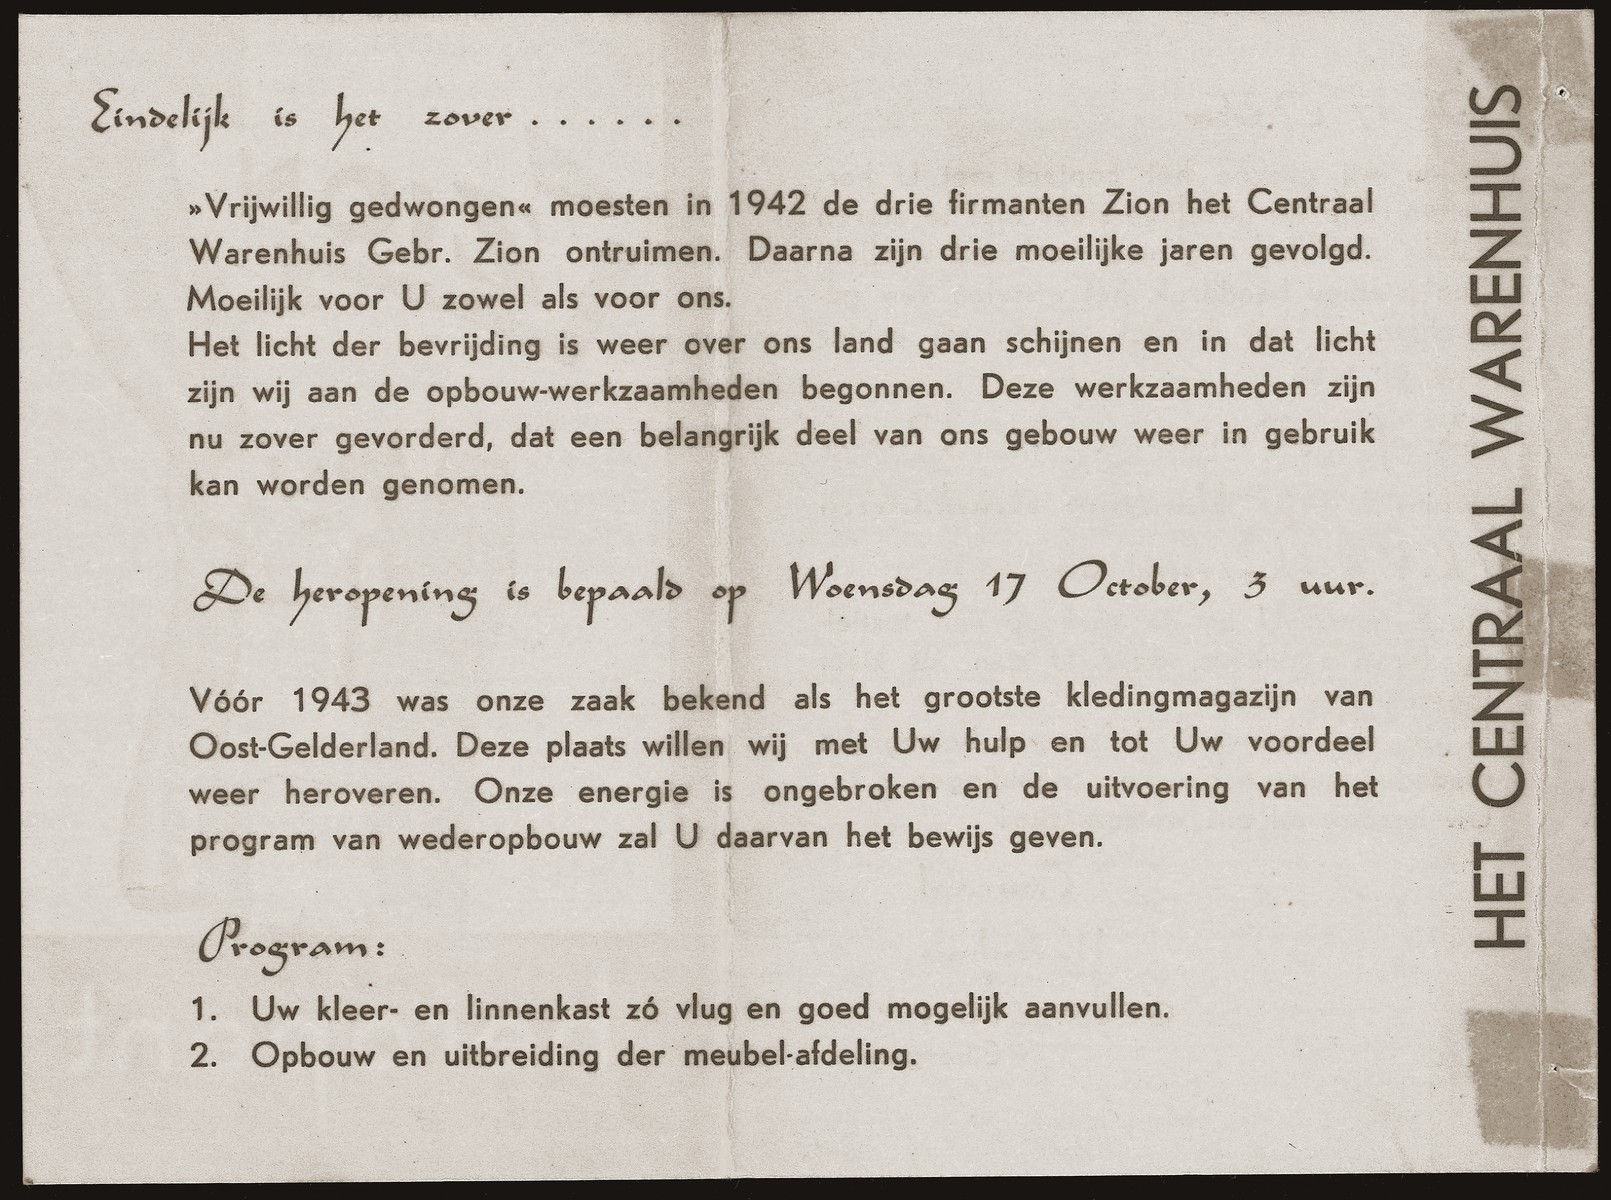 Invitation To The Reopening Of The Zion Clothing And Fabric Store In Eibergen Which Includes A Brief Account Of Its History During The War Collections Search United States Holocaust Memorial Museum